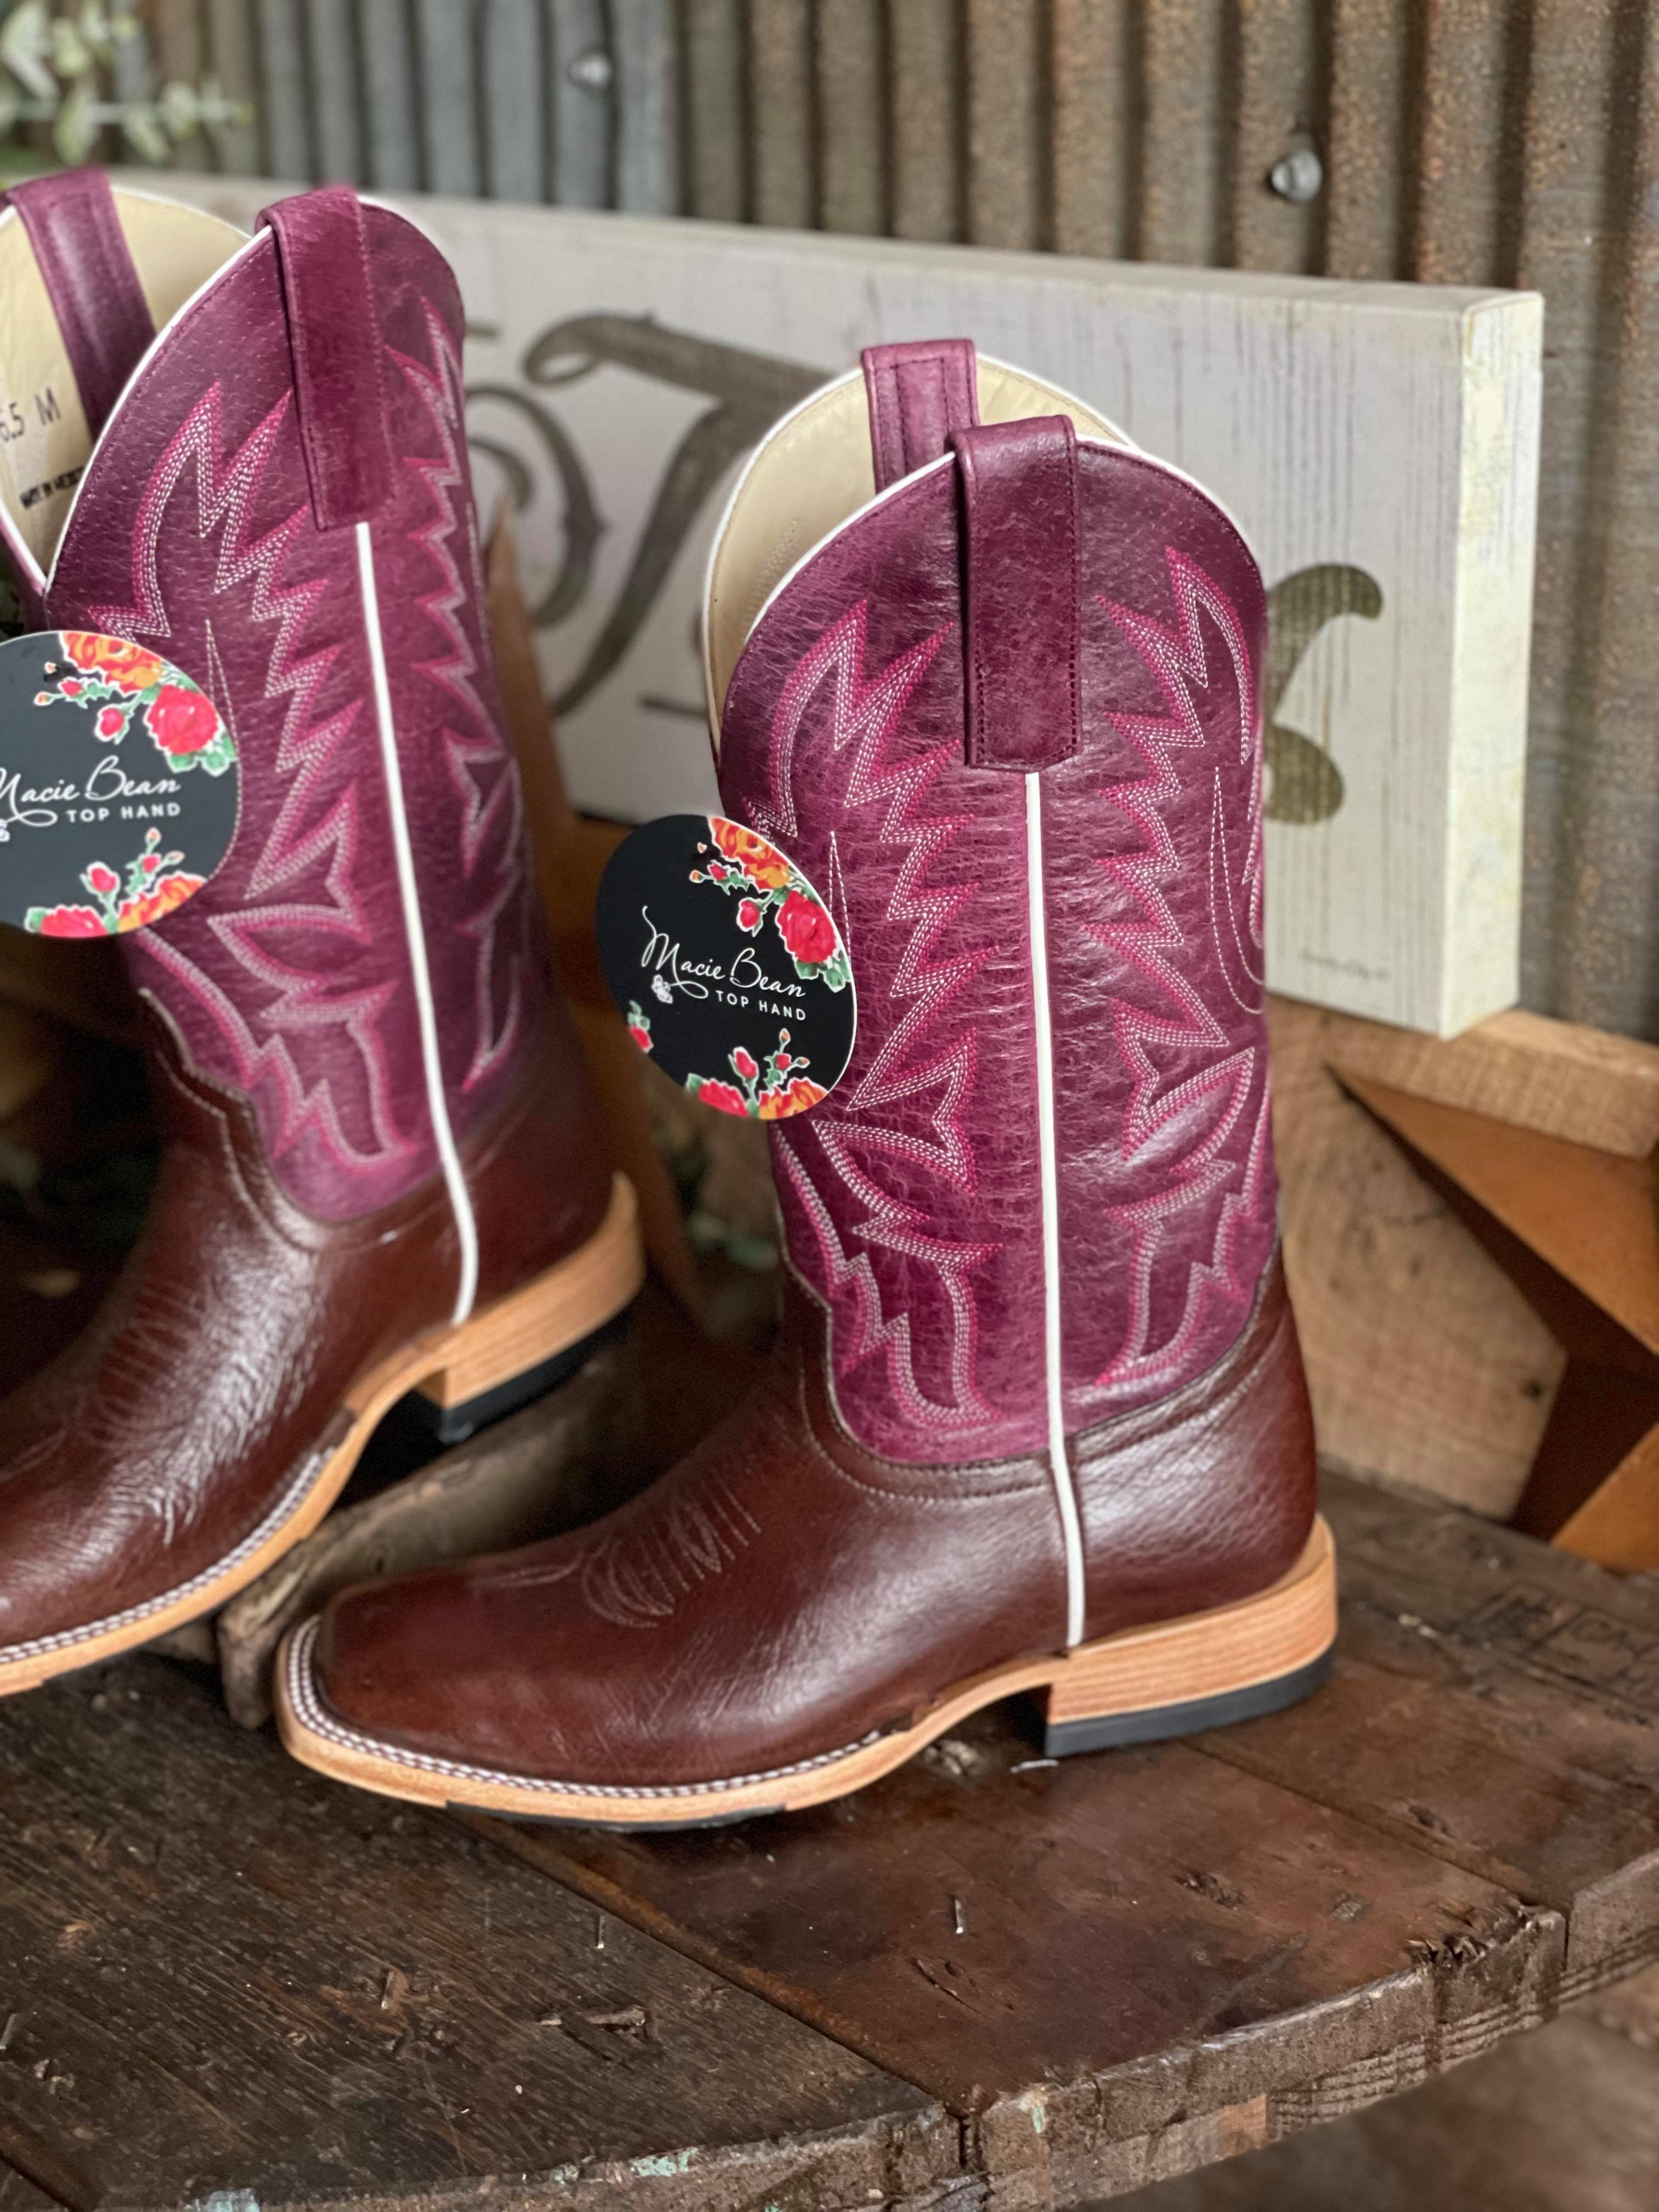 MB Women's Kango Tobacco Smooth Quill Boots-Women's Boots-Anderson Bean-Lucky J Boots & More, Women's, Men's, & Kids Western Store Located in Carthage, MO